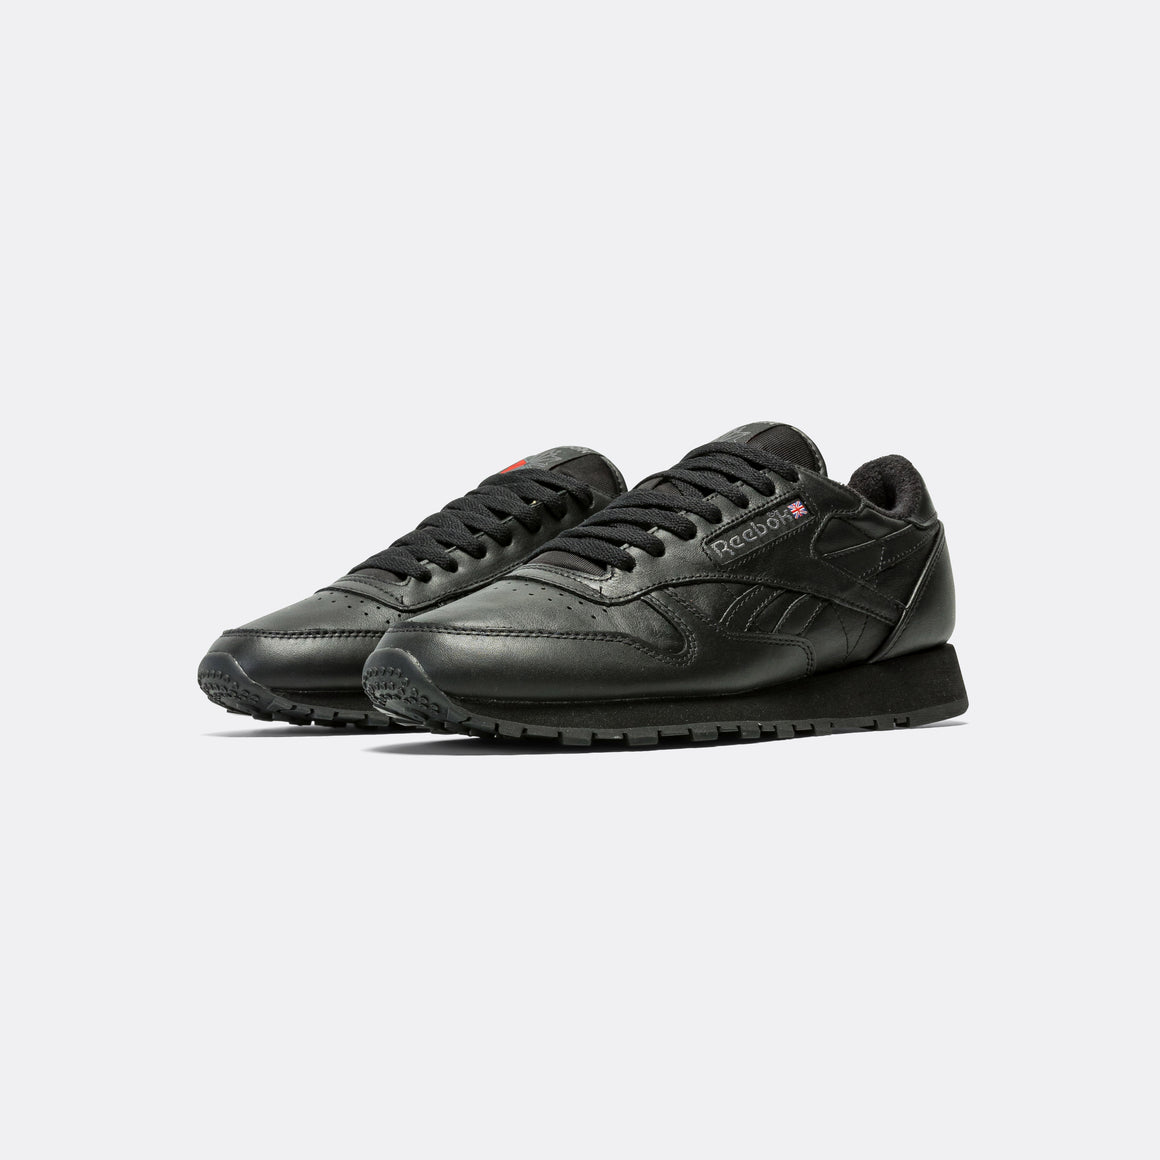 Reebok - Classic Leather - Black/Black - UP THERE